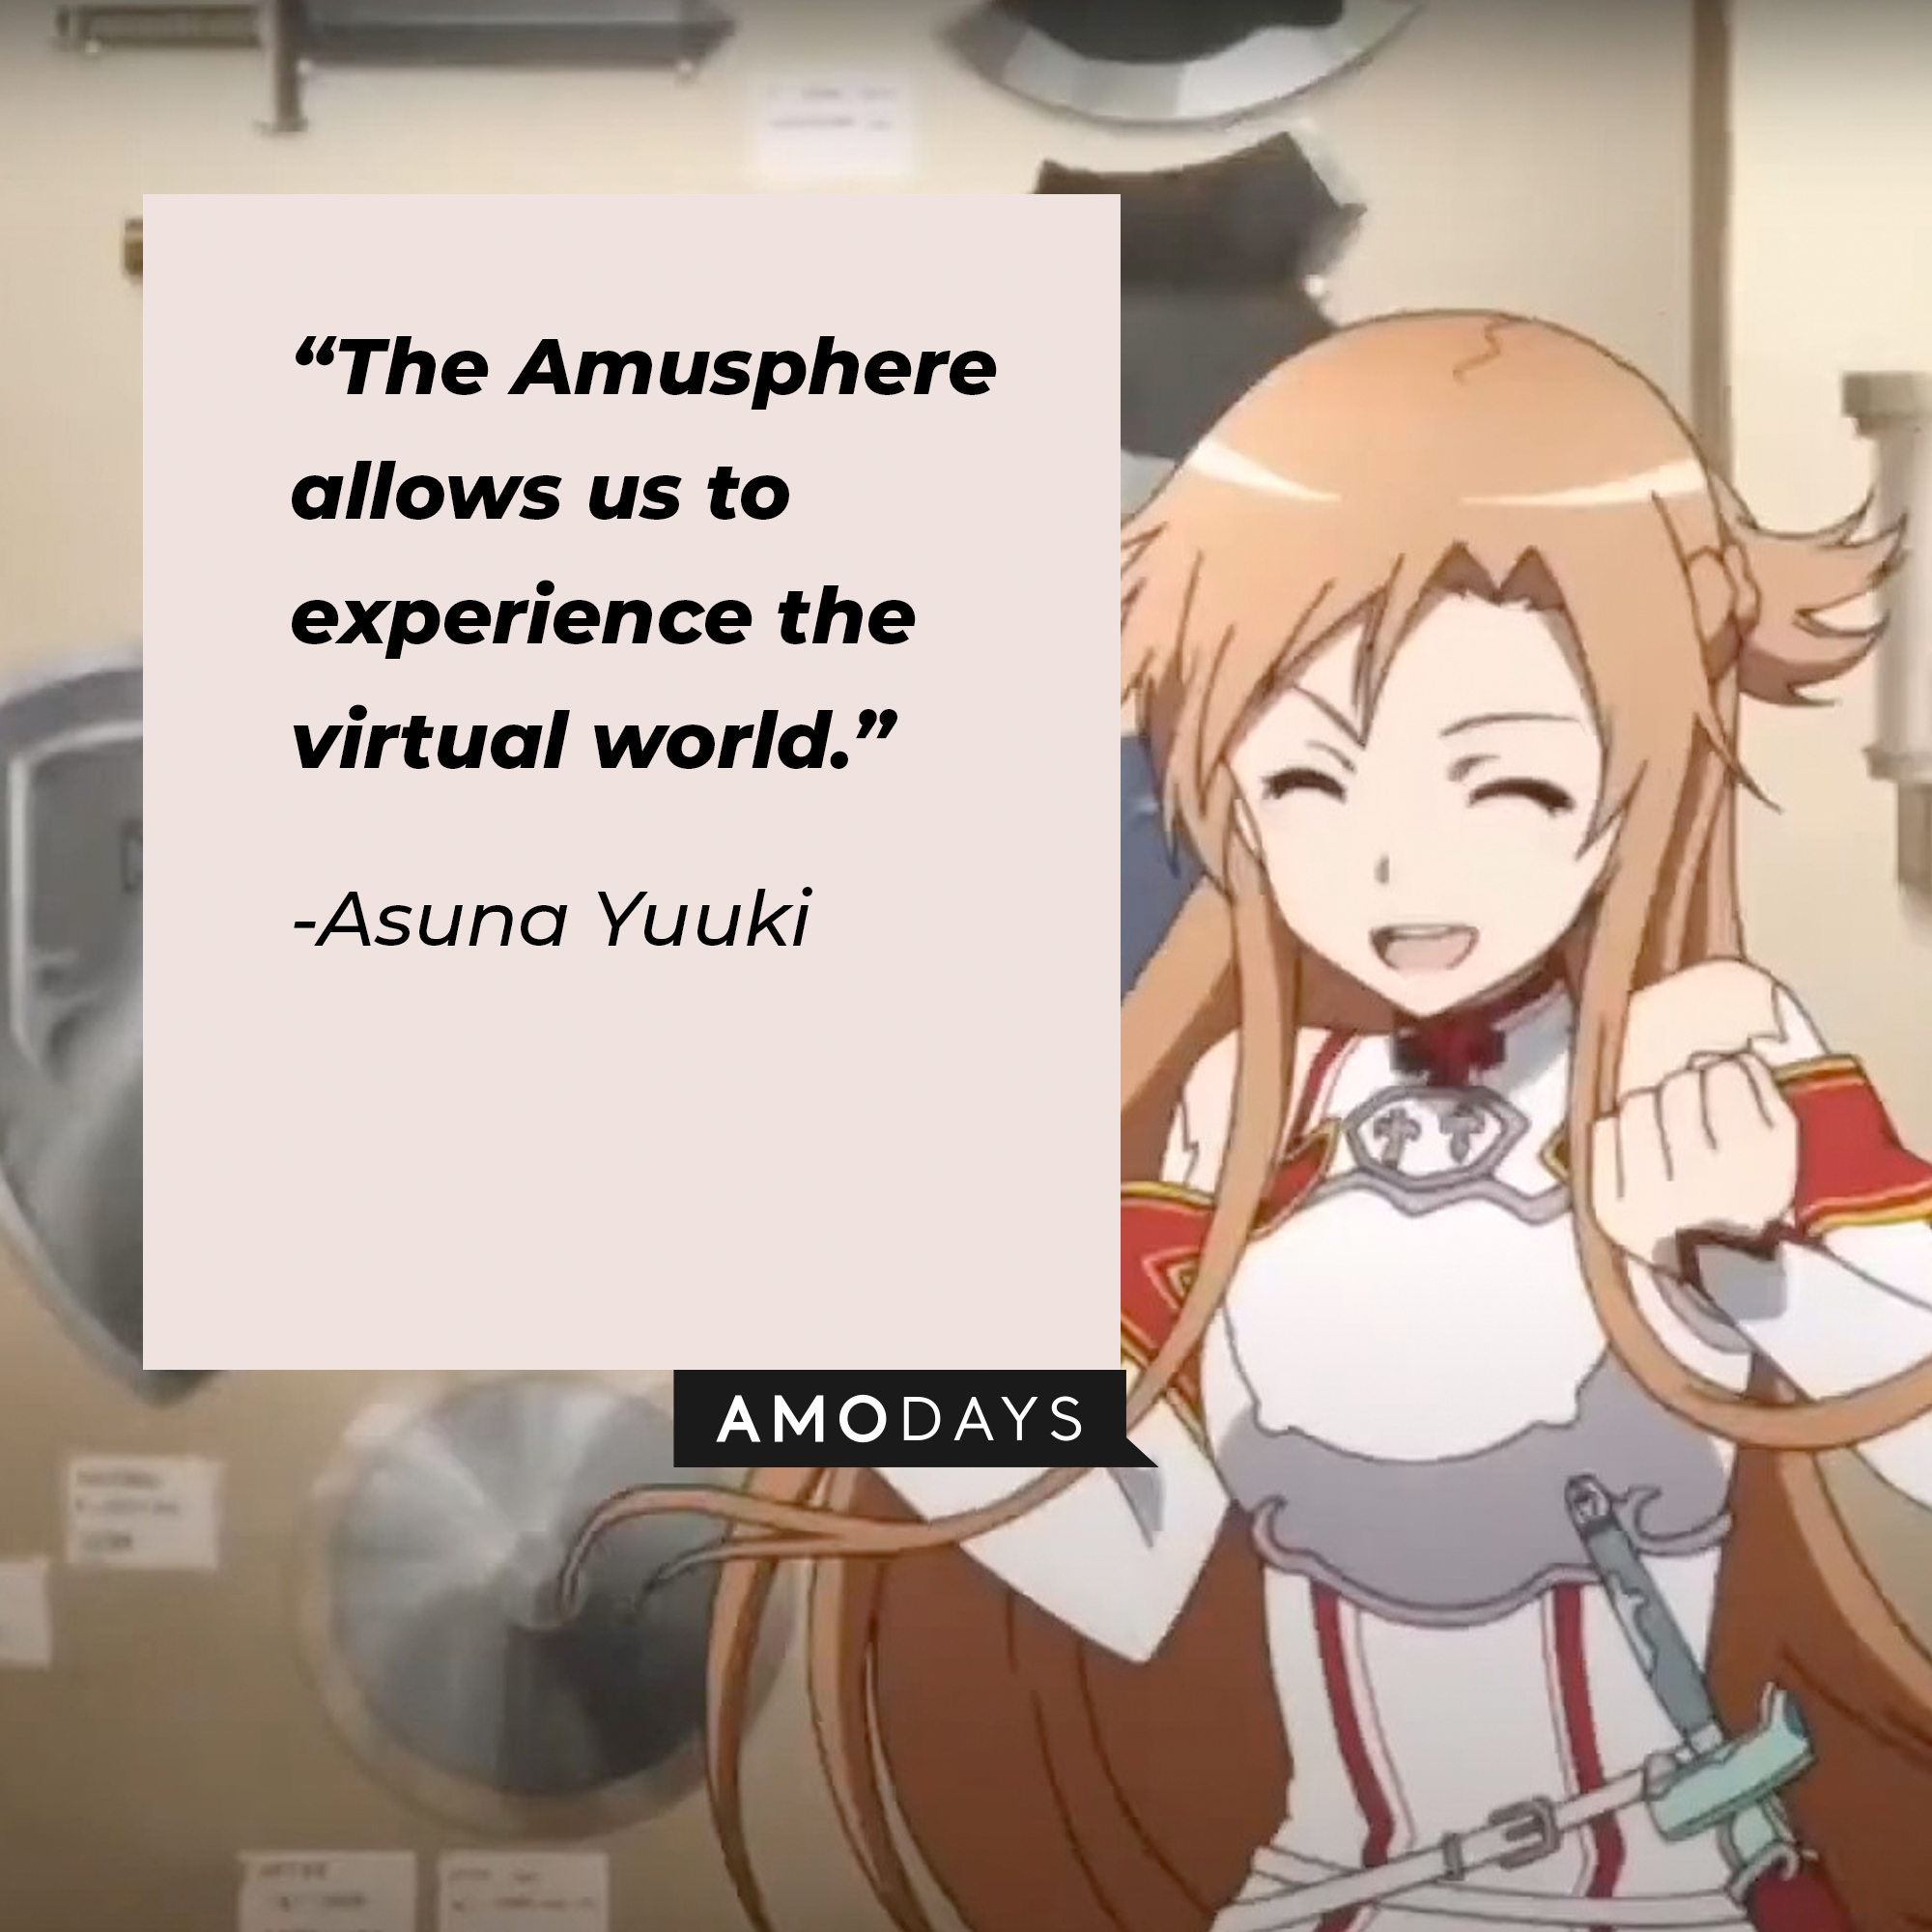 A picture of Asuna Yuuki with her quote: “The Amusphere allows us to experience the virtual world.” | Source: facebook.com/SwordArtOnlineUSA